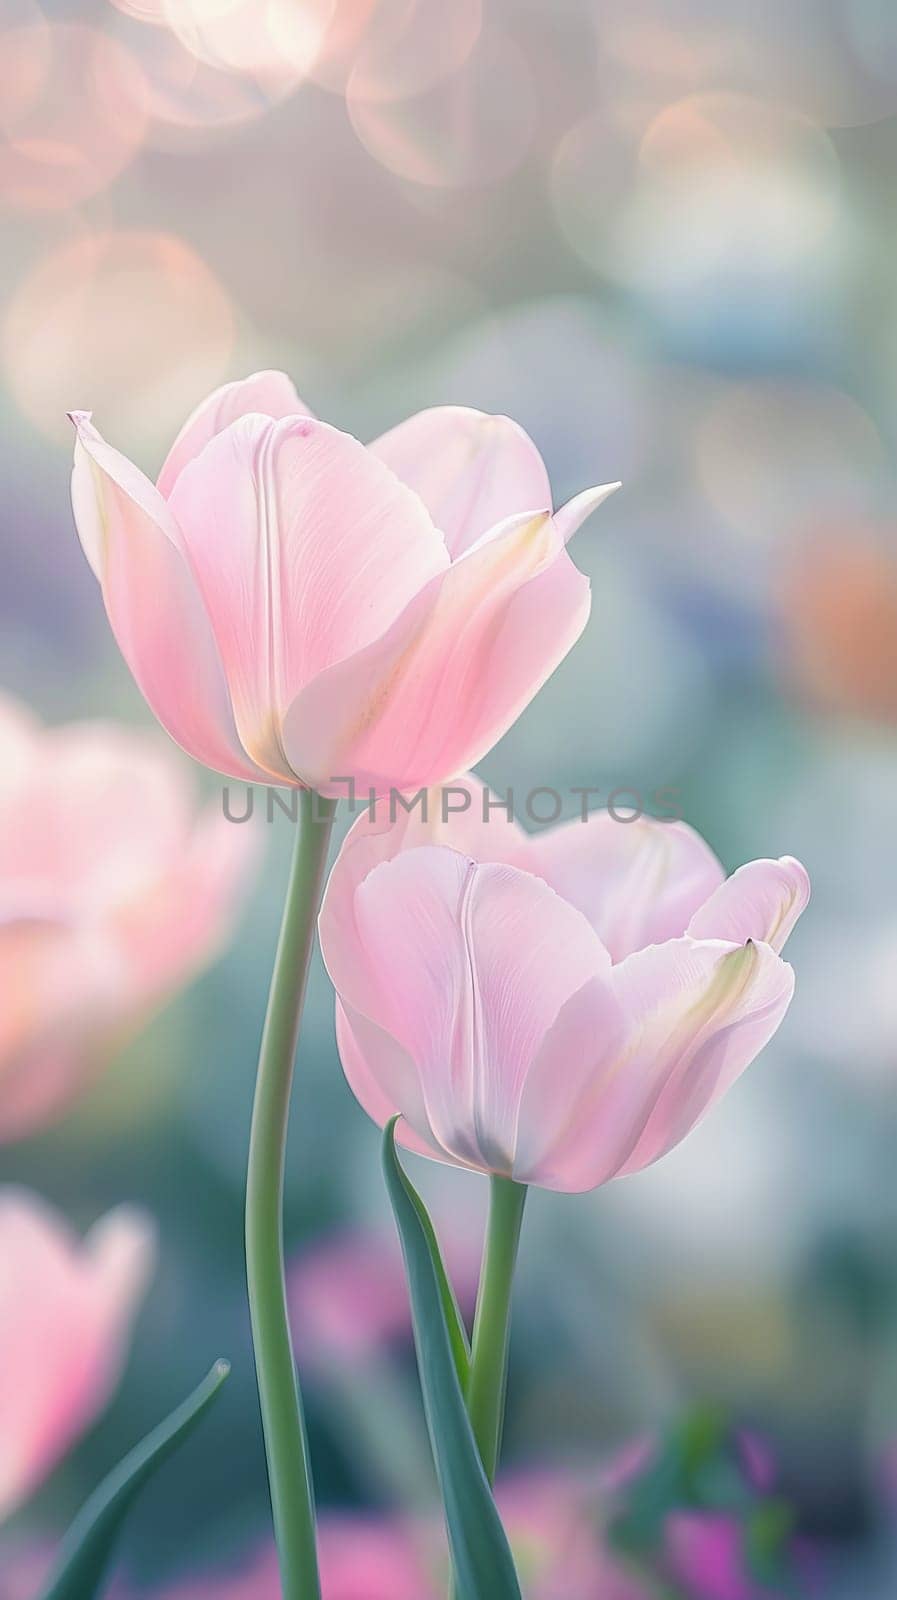 Close-up of pink tulips with blurred background and bokeh effect